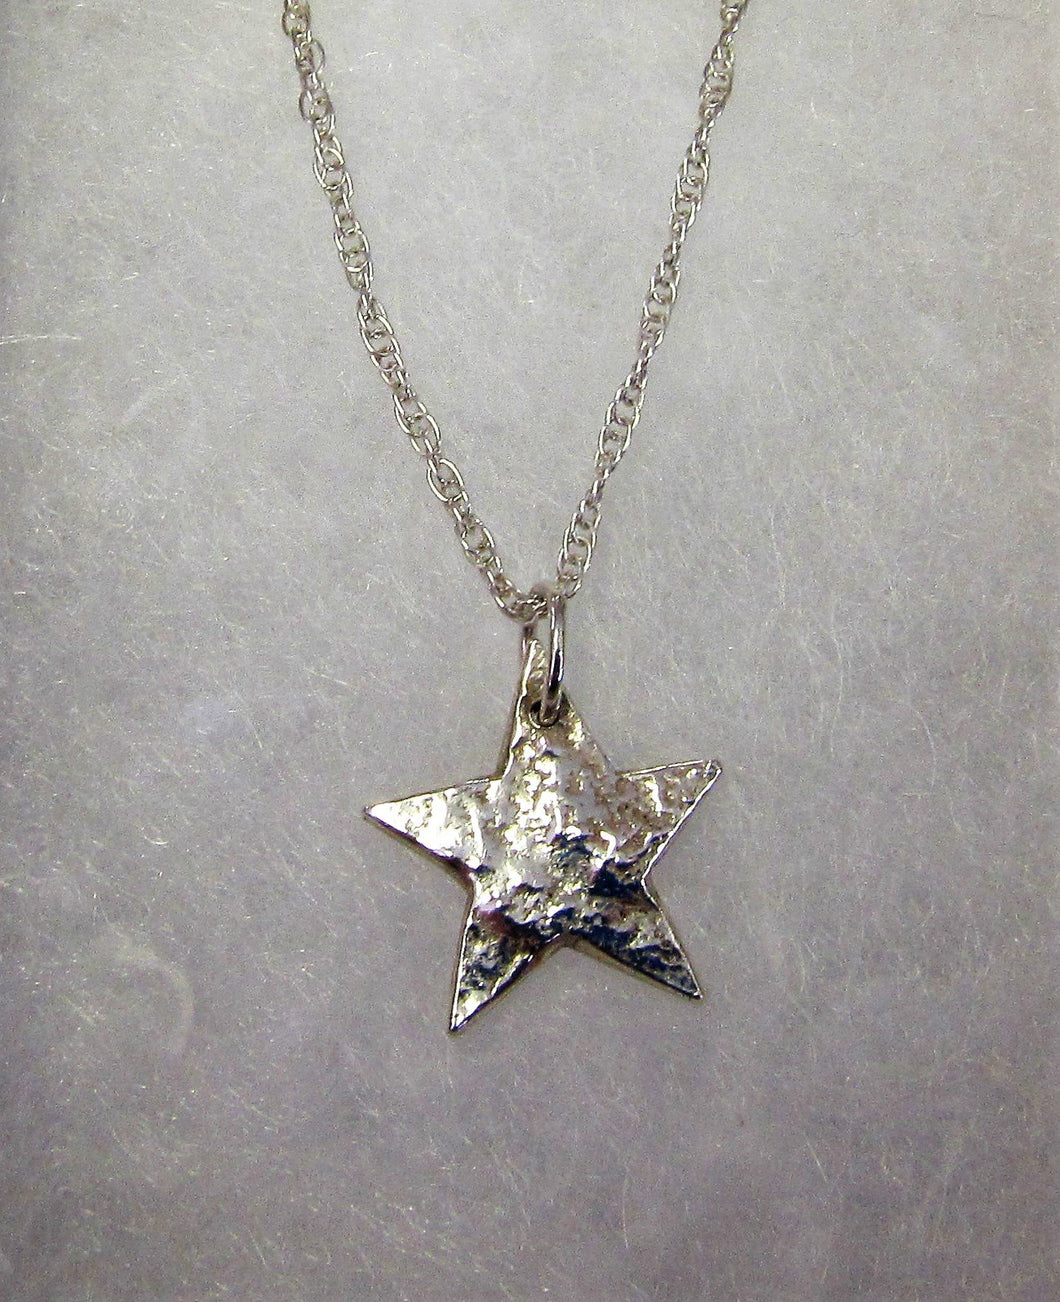 Handcrafted 925 sterling silver reticulated hand cut star necklace